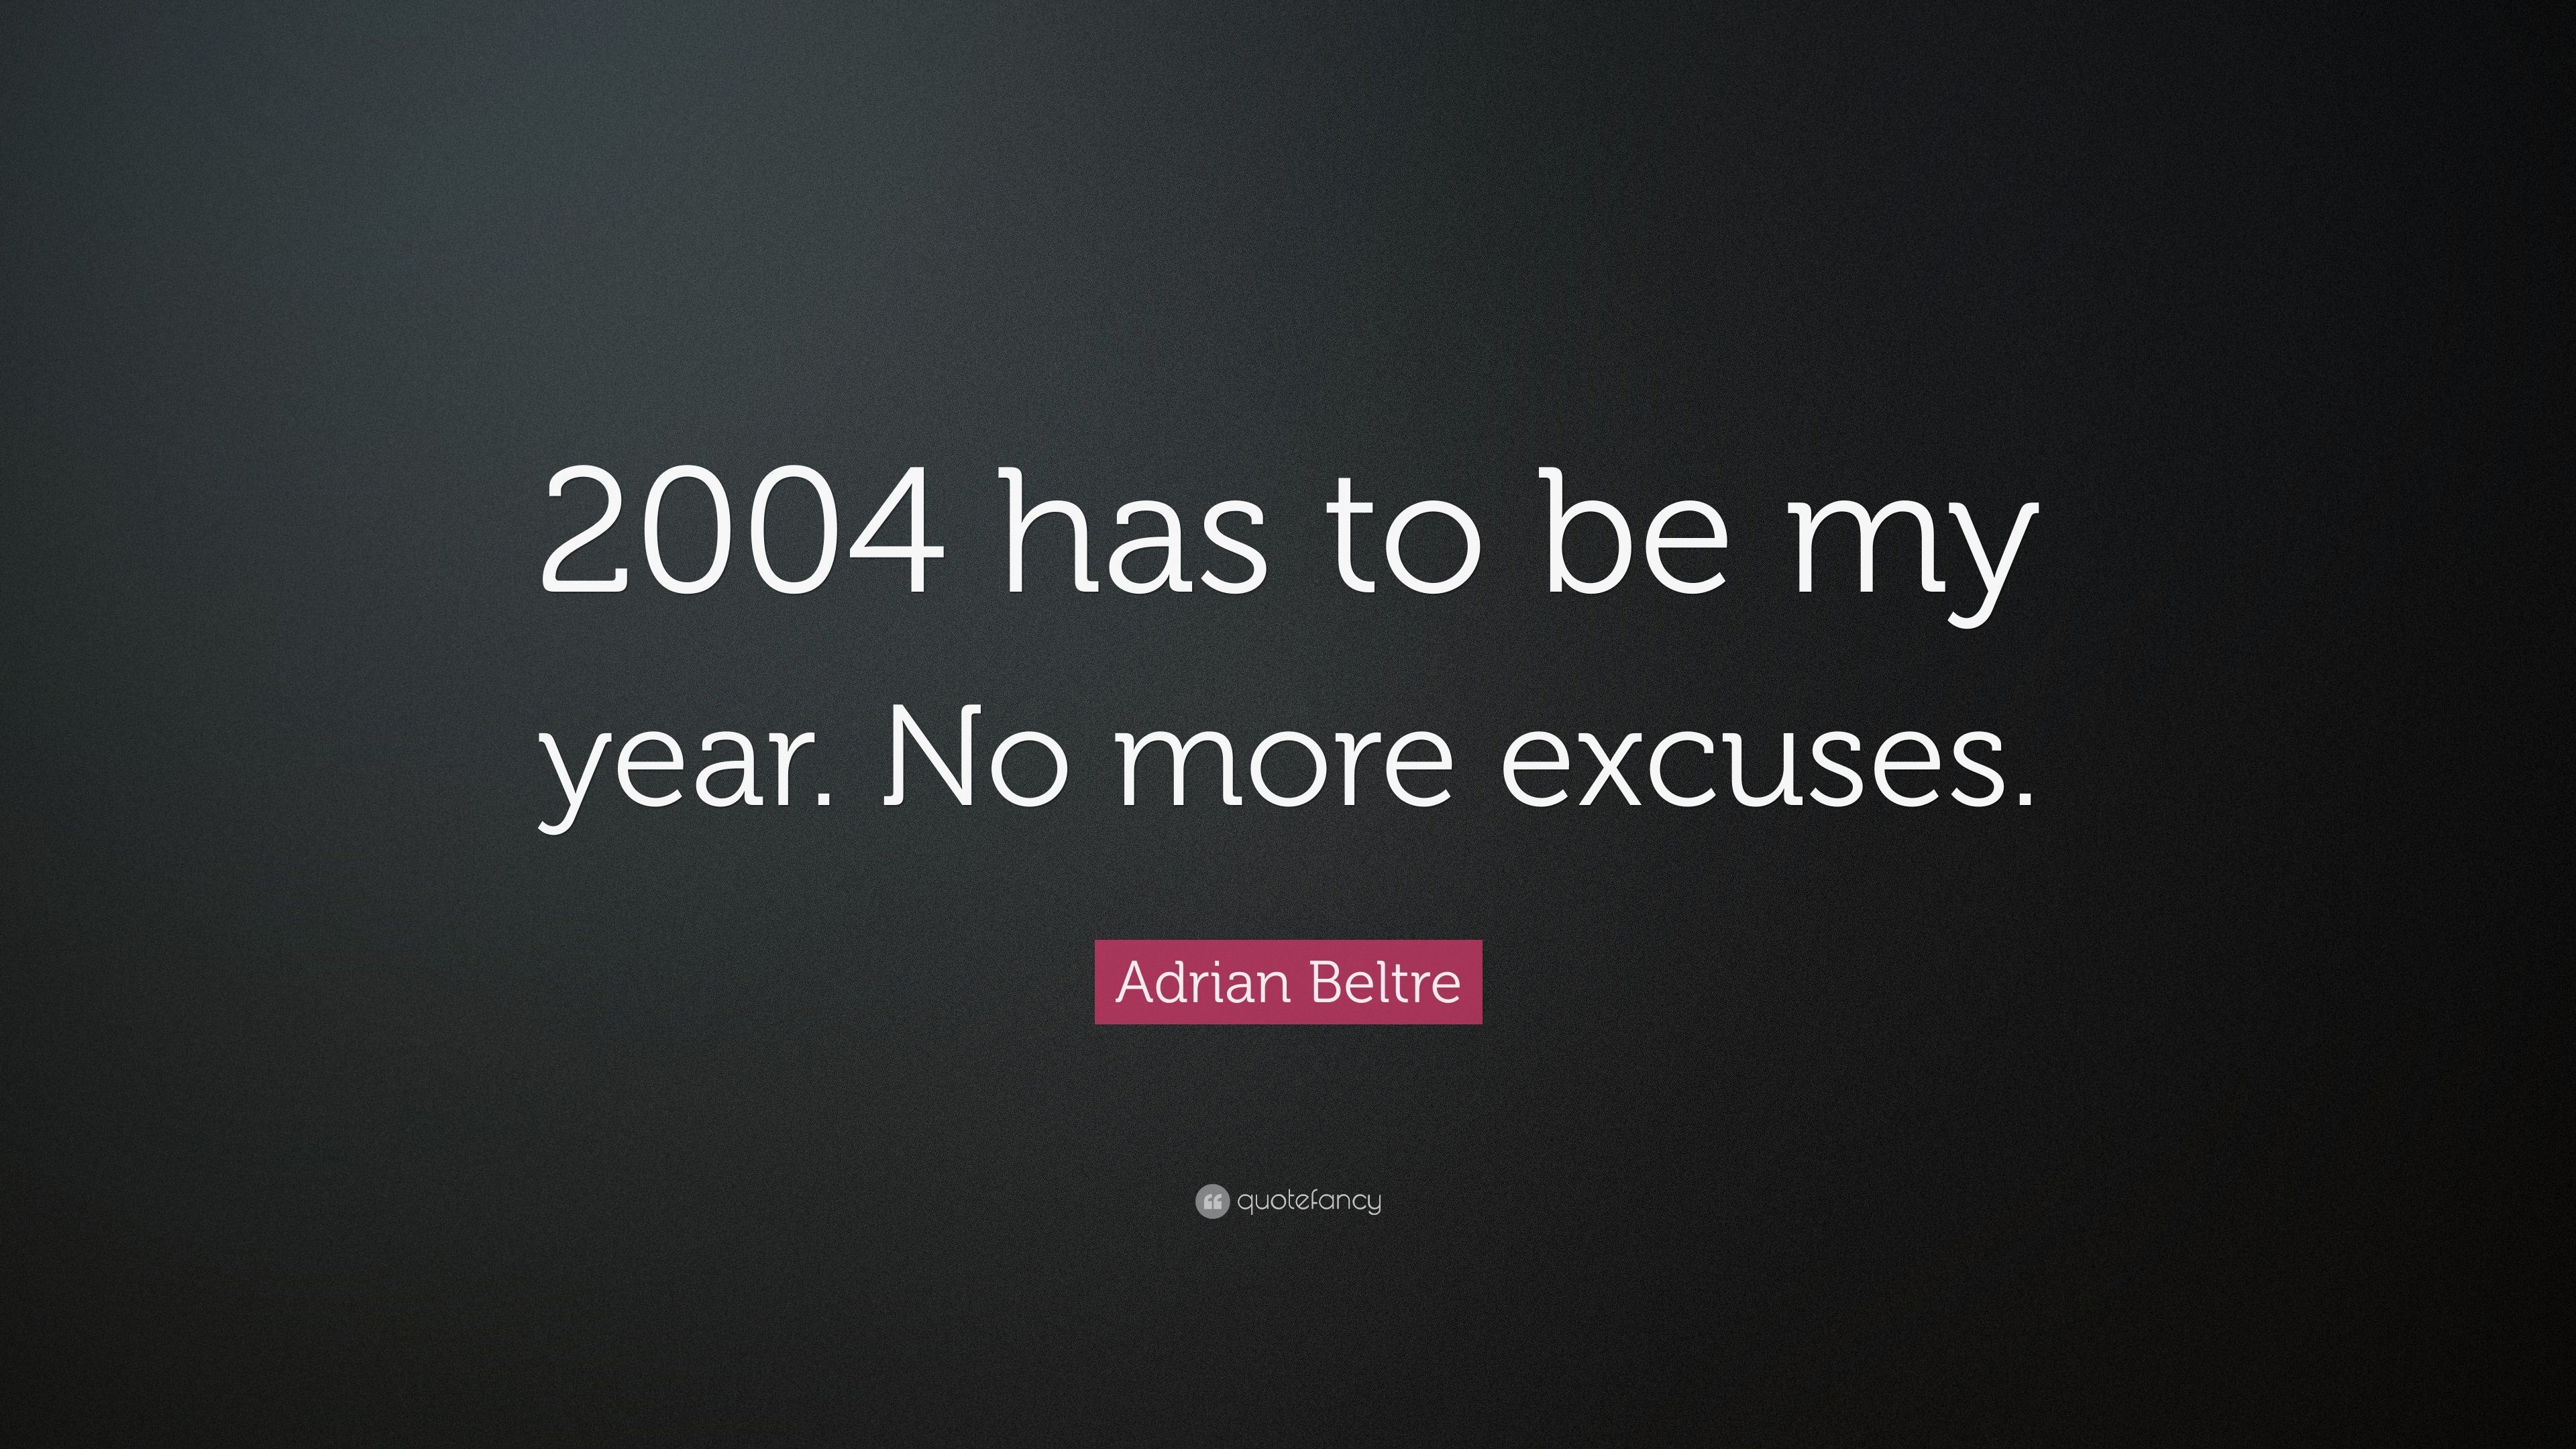 Adrian Beltre Quote: “2004 has to be my year. No more excuses.” 7